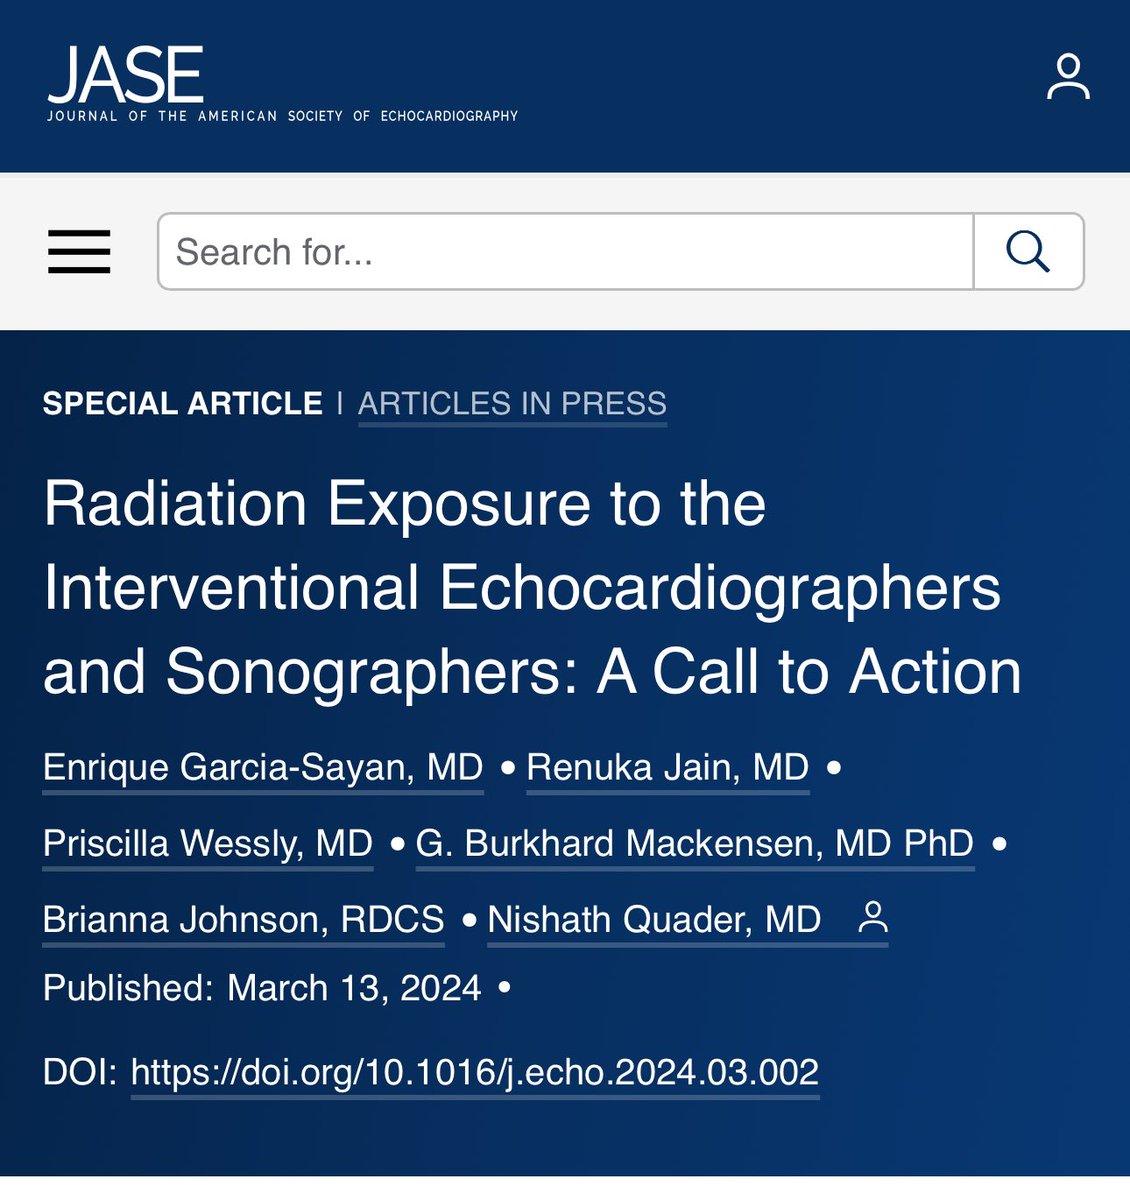 Radiation exposure to the Interventional Echocardiographer, a serious issue that is commonly ignored. Thank you to my coauthors for this important “call to action” paper #IE #radiation @EGarciaSayan @renujain19 @saricmu @SLittleMD @hahn_rt @WashUCardiology @ASE360 @iamritu